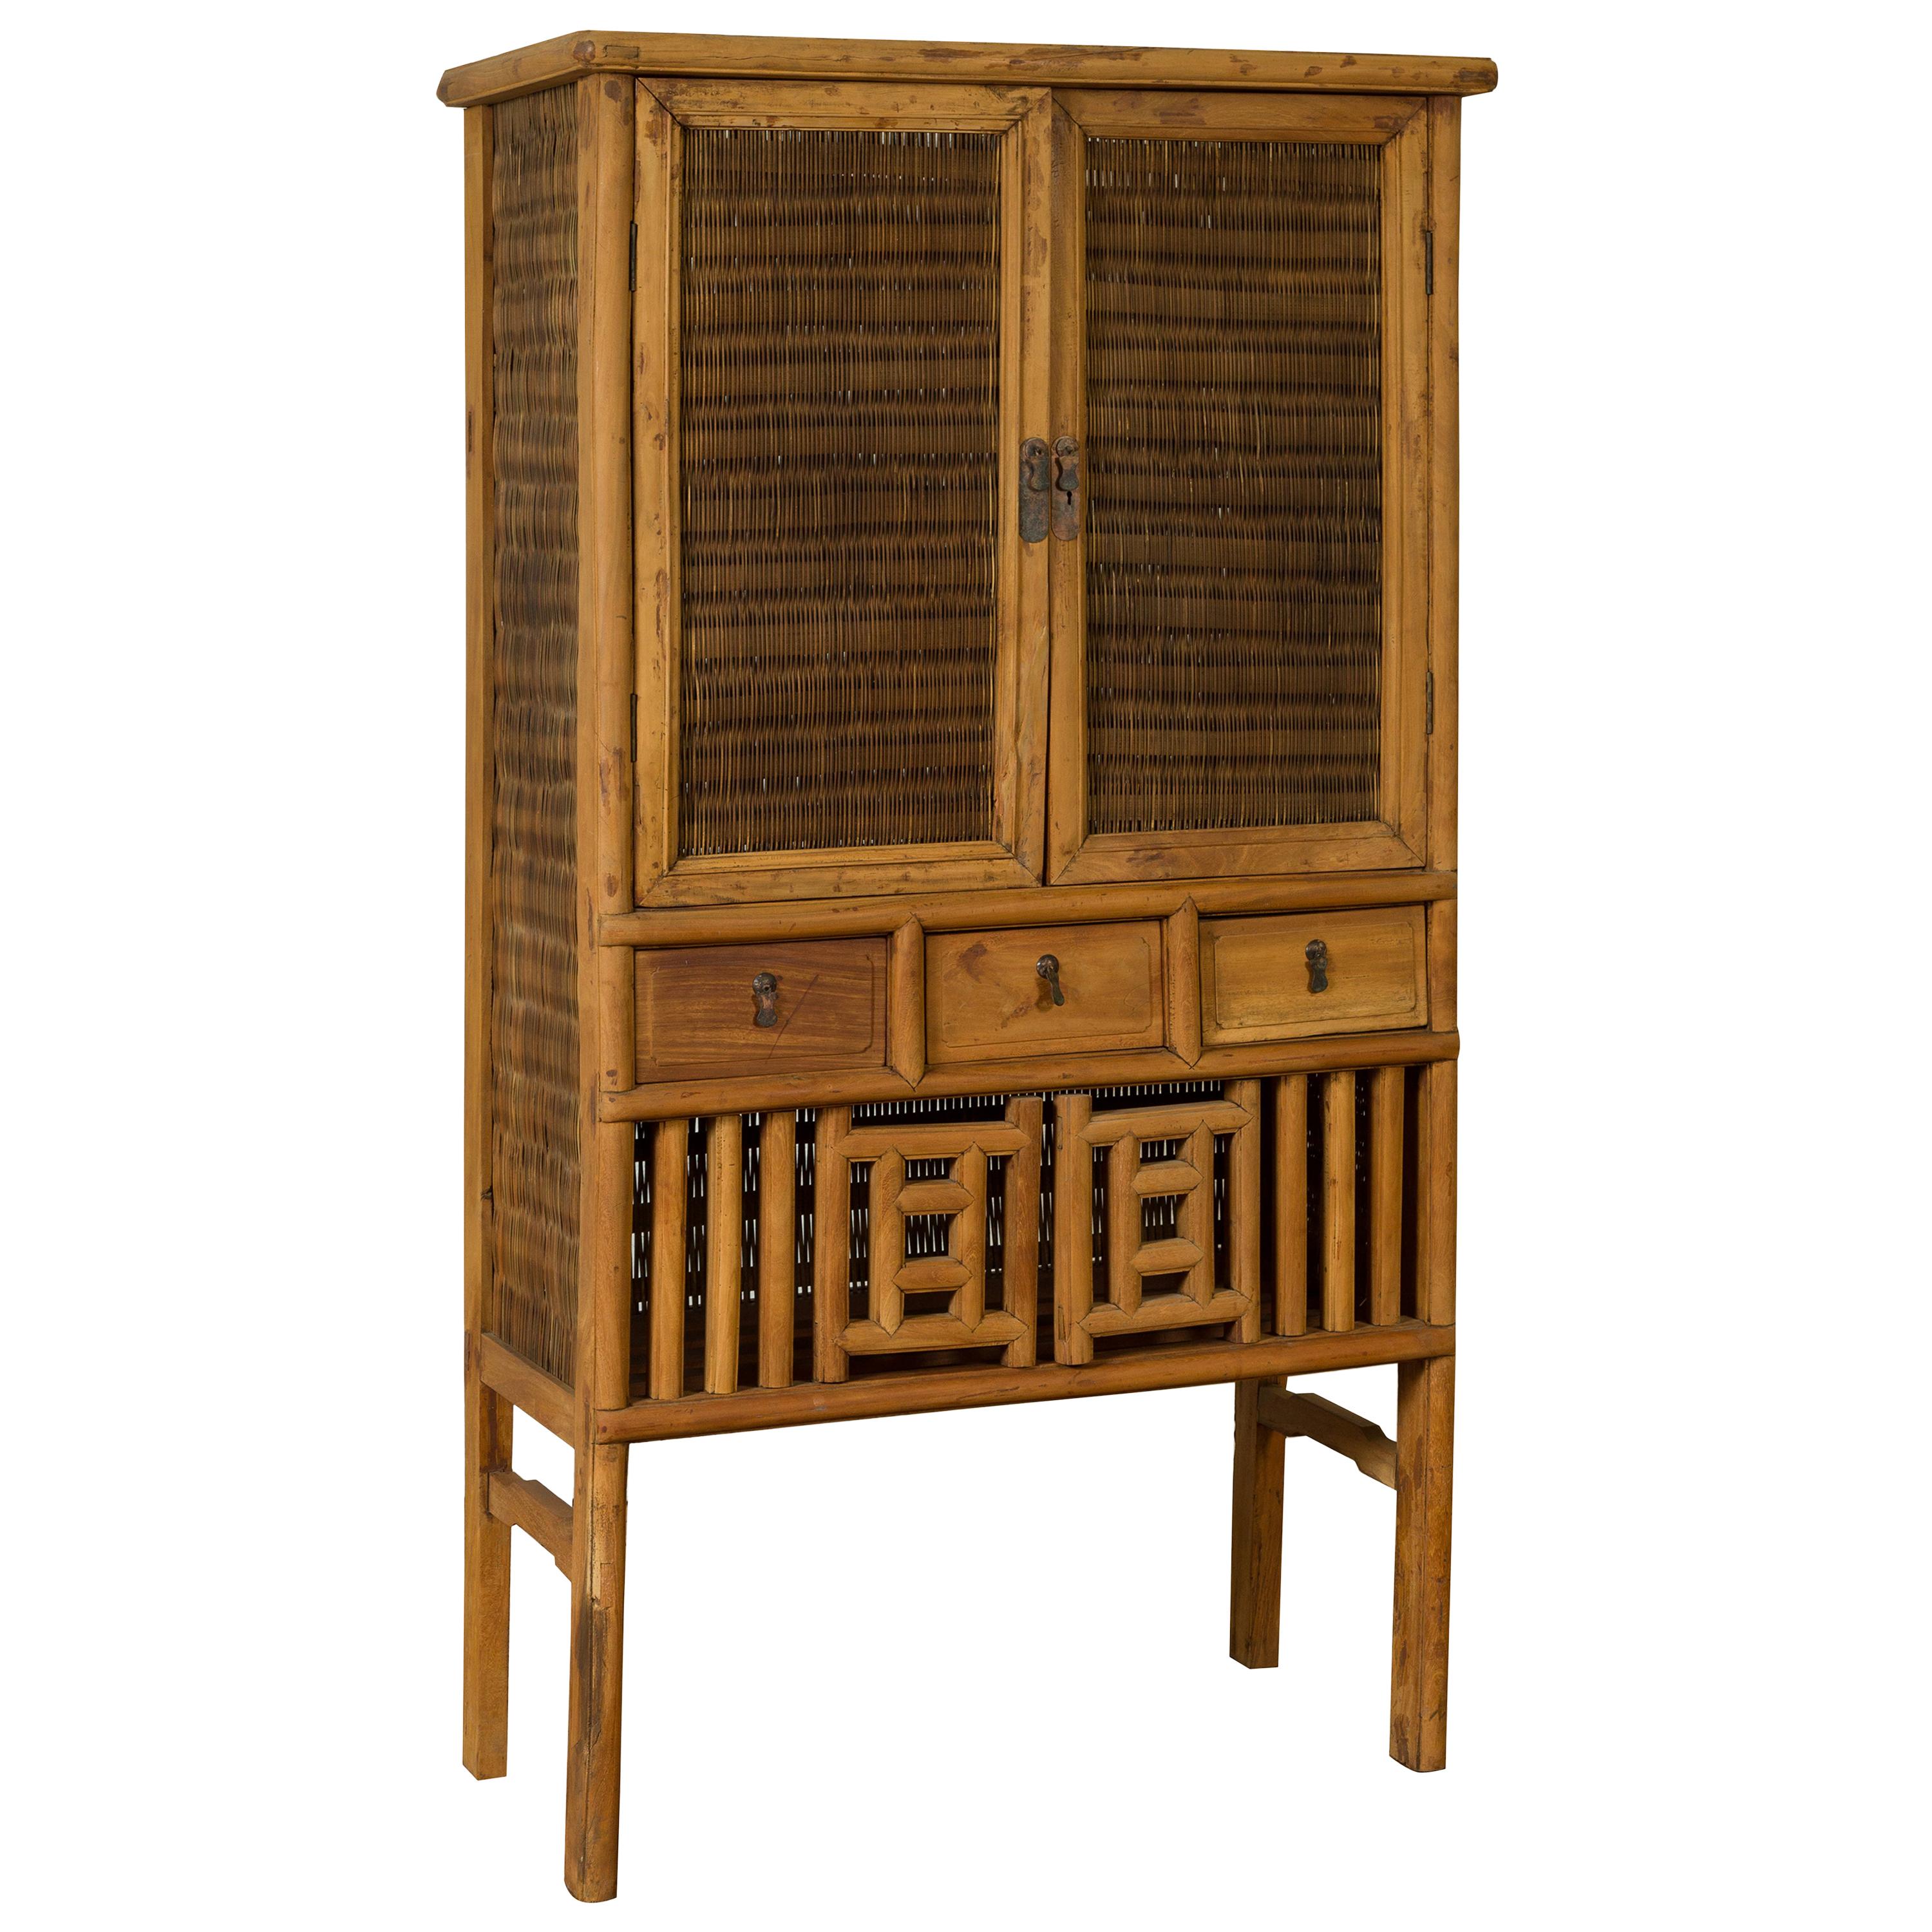 Indonesian Cabinet with Rattan Doors, Drawers and Fretwork Sliding Panels